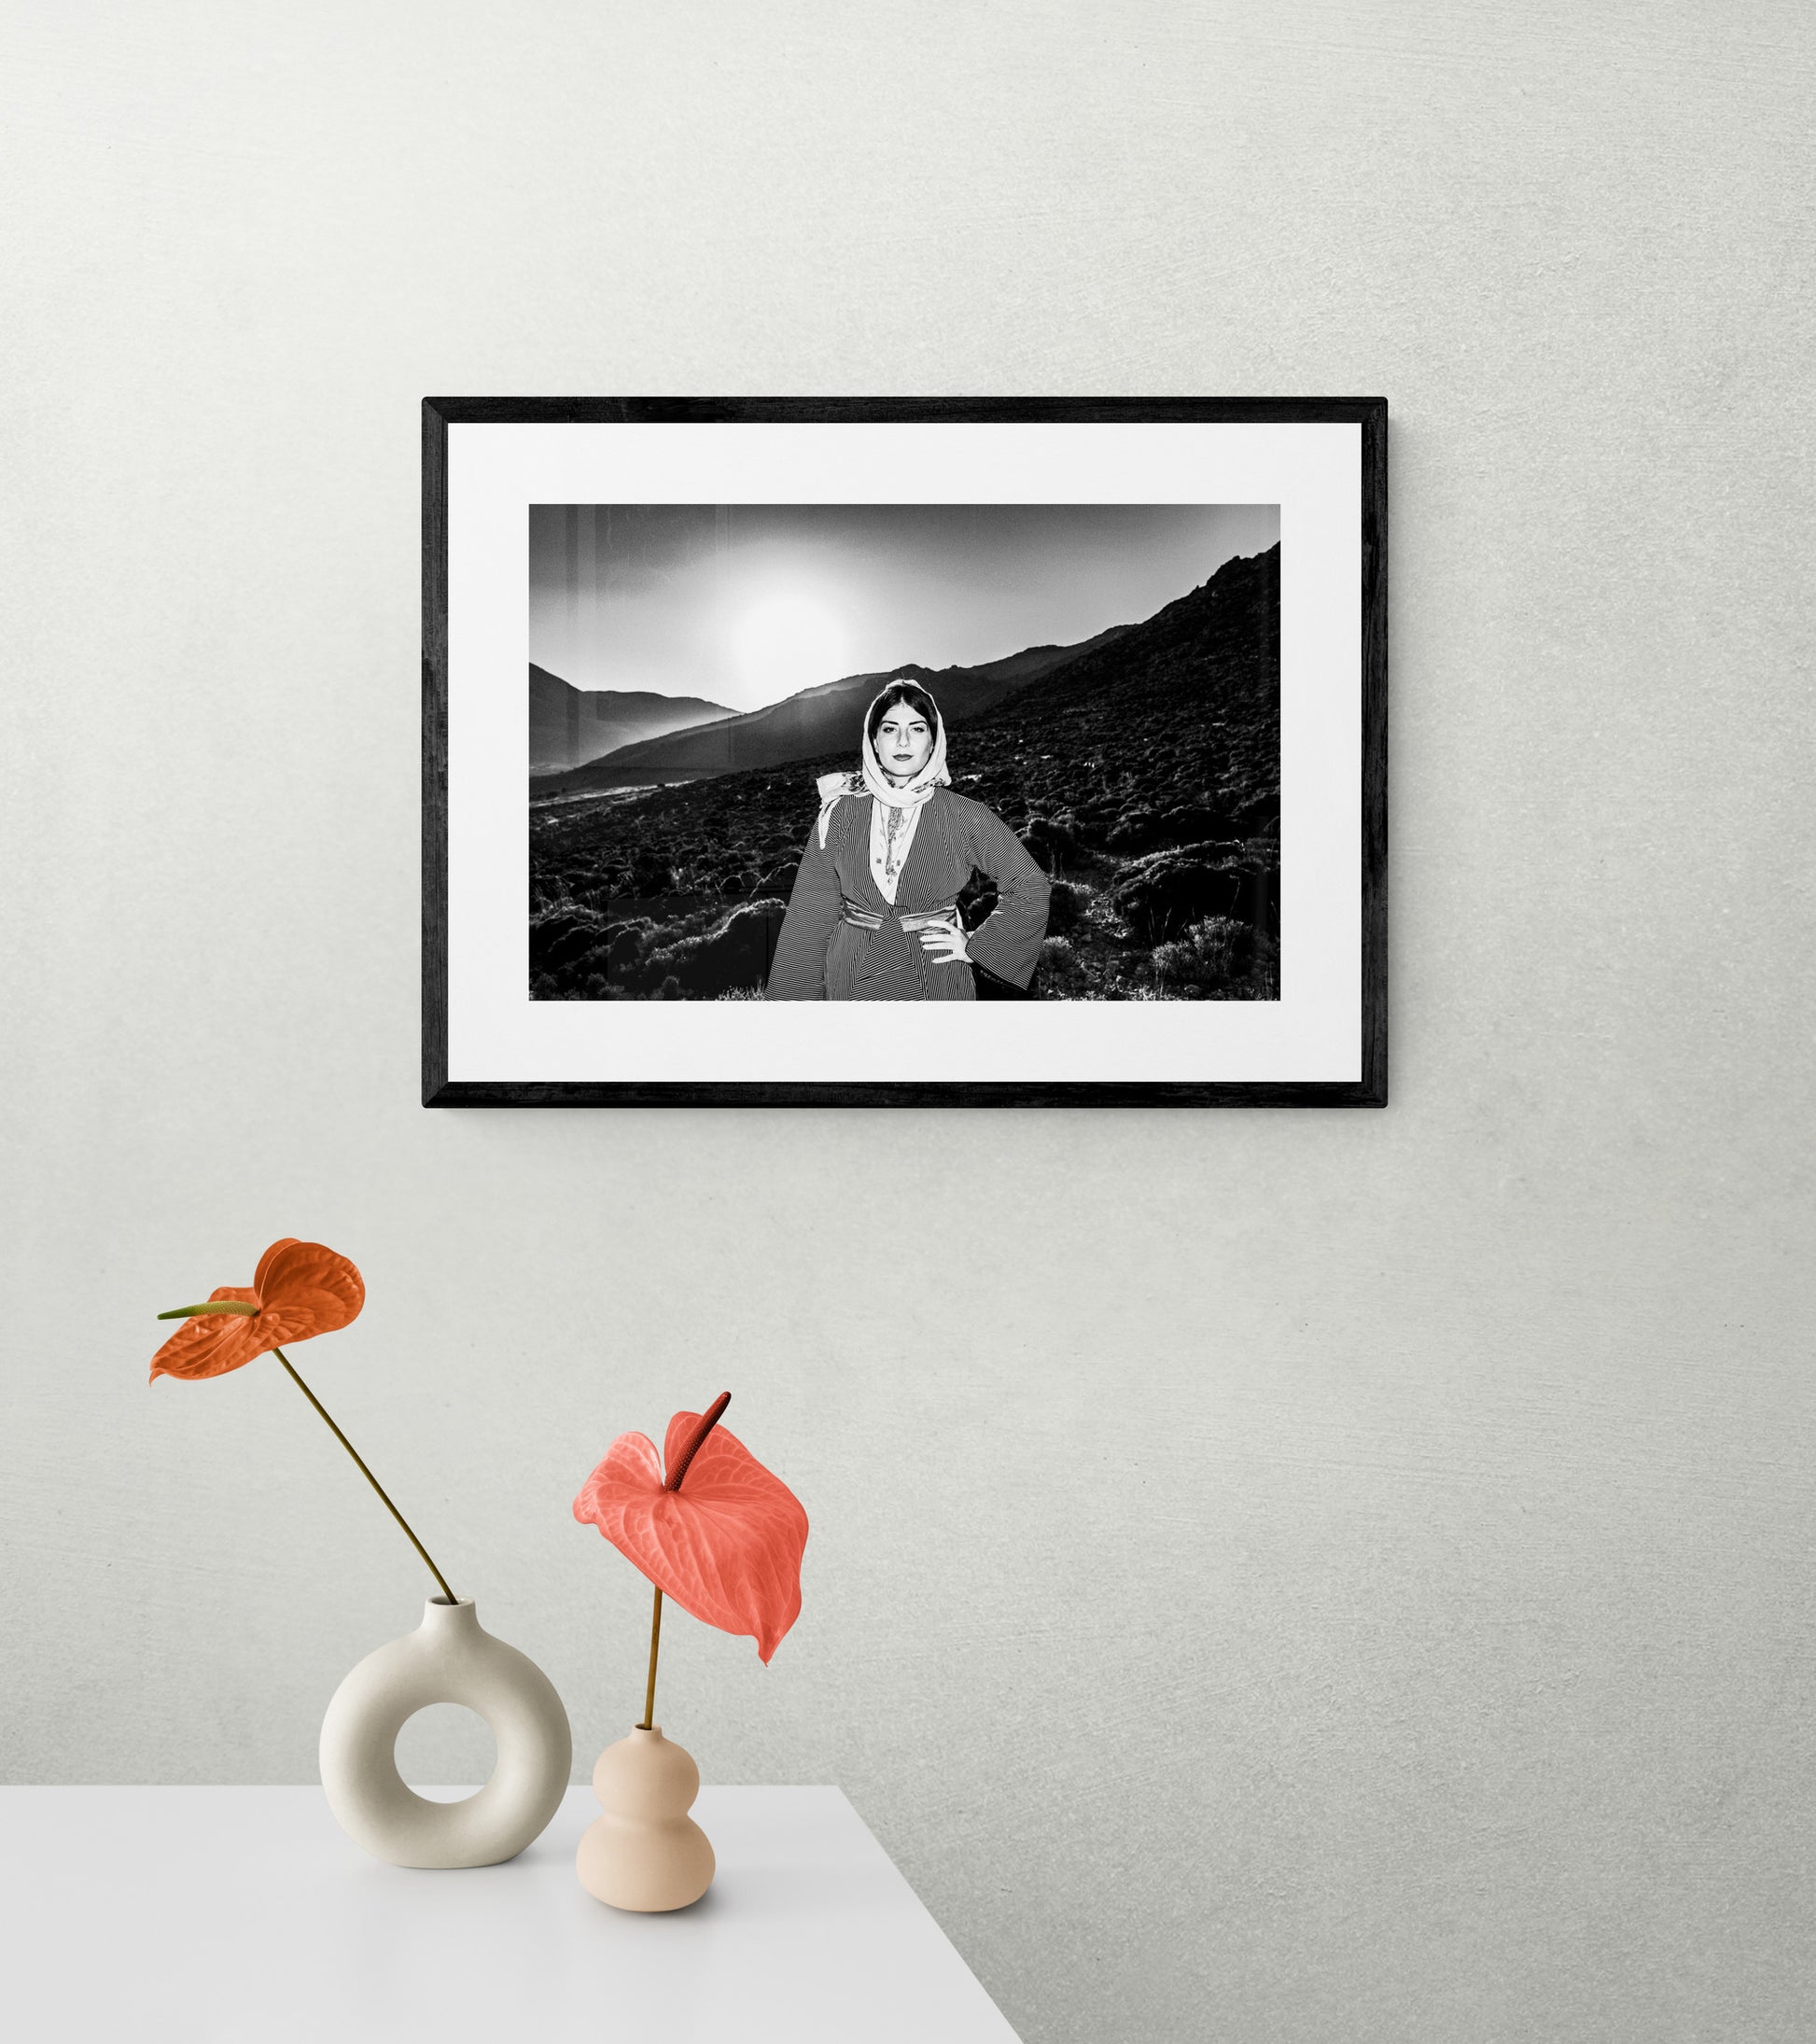 Black and White Photography Wall Art Greece | Kavathe in Kalymnos Dodecanese by George Tatakis - single framed photo